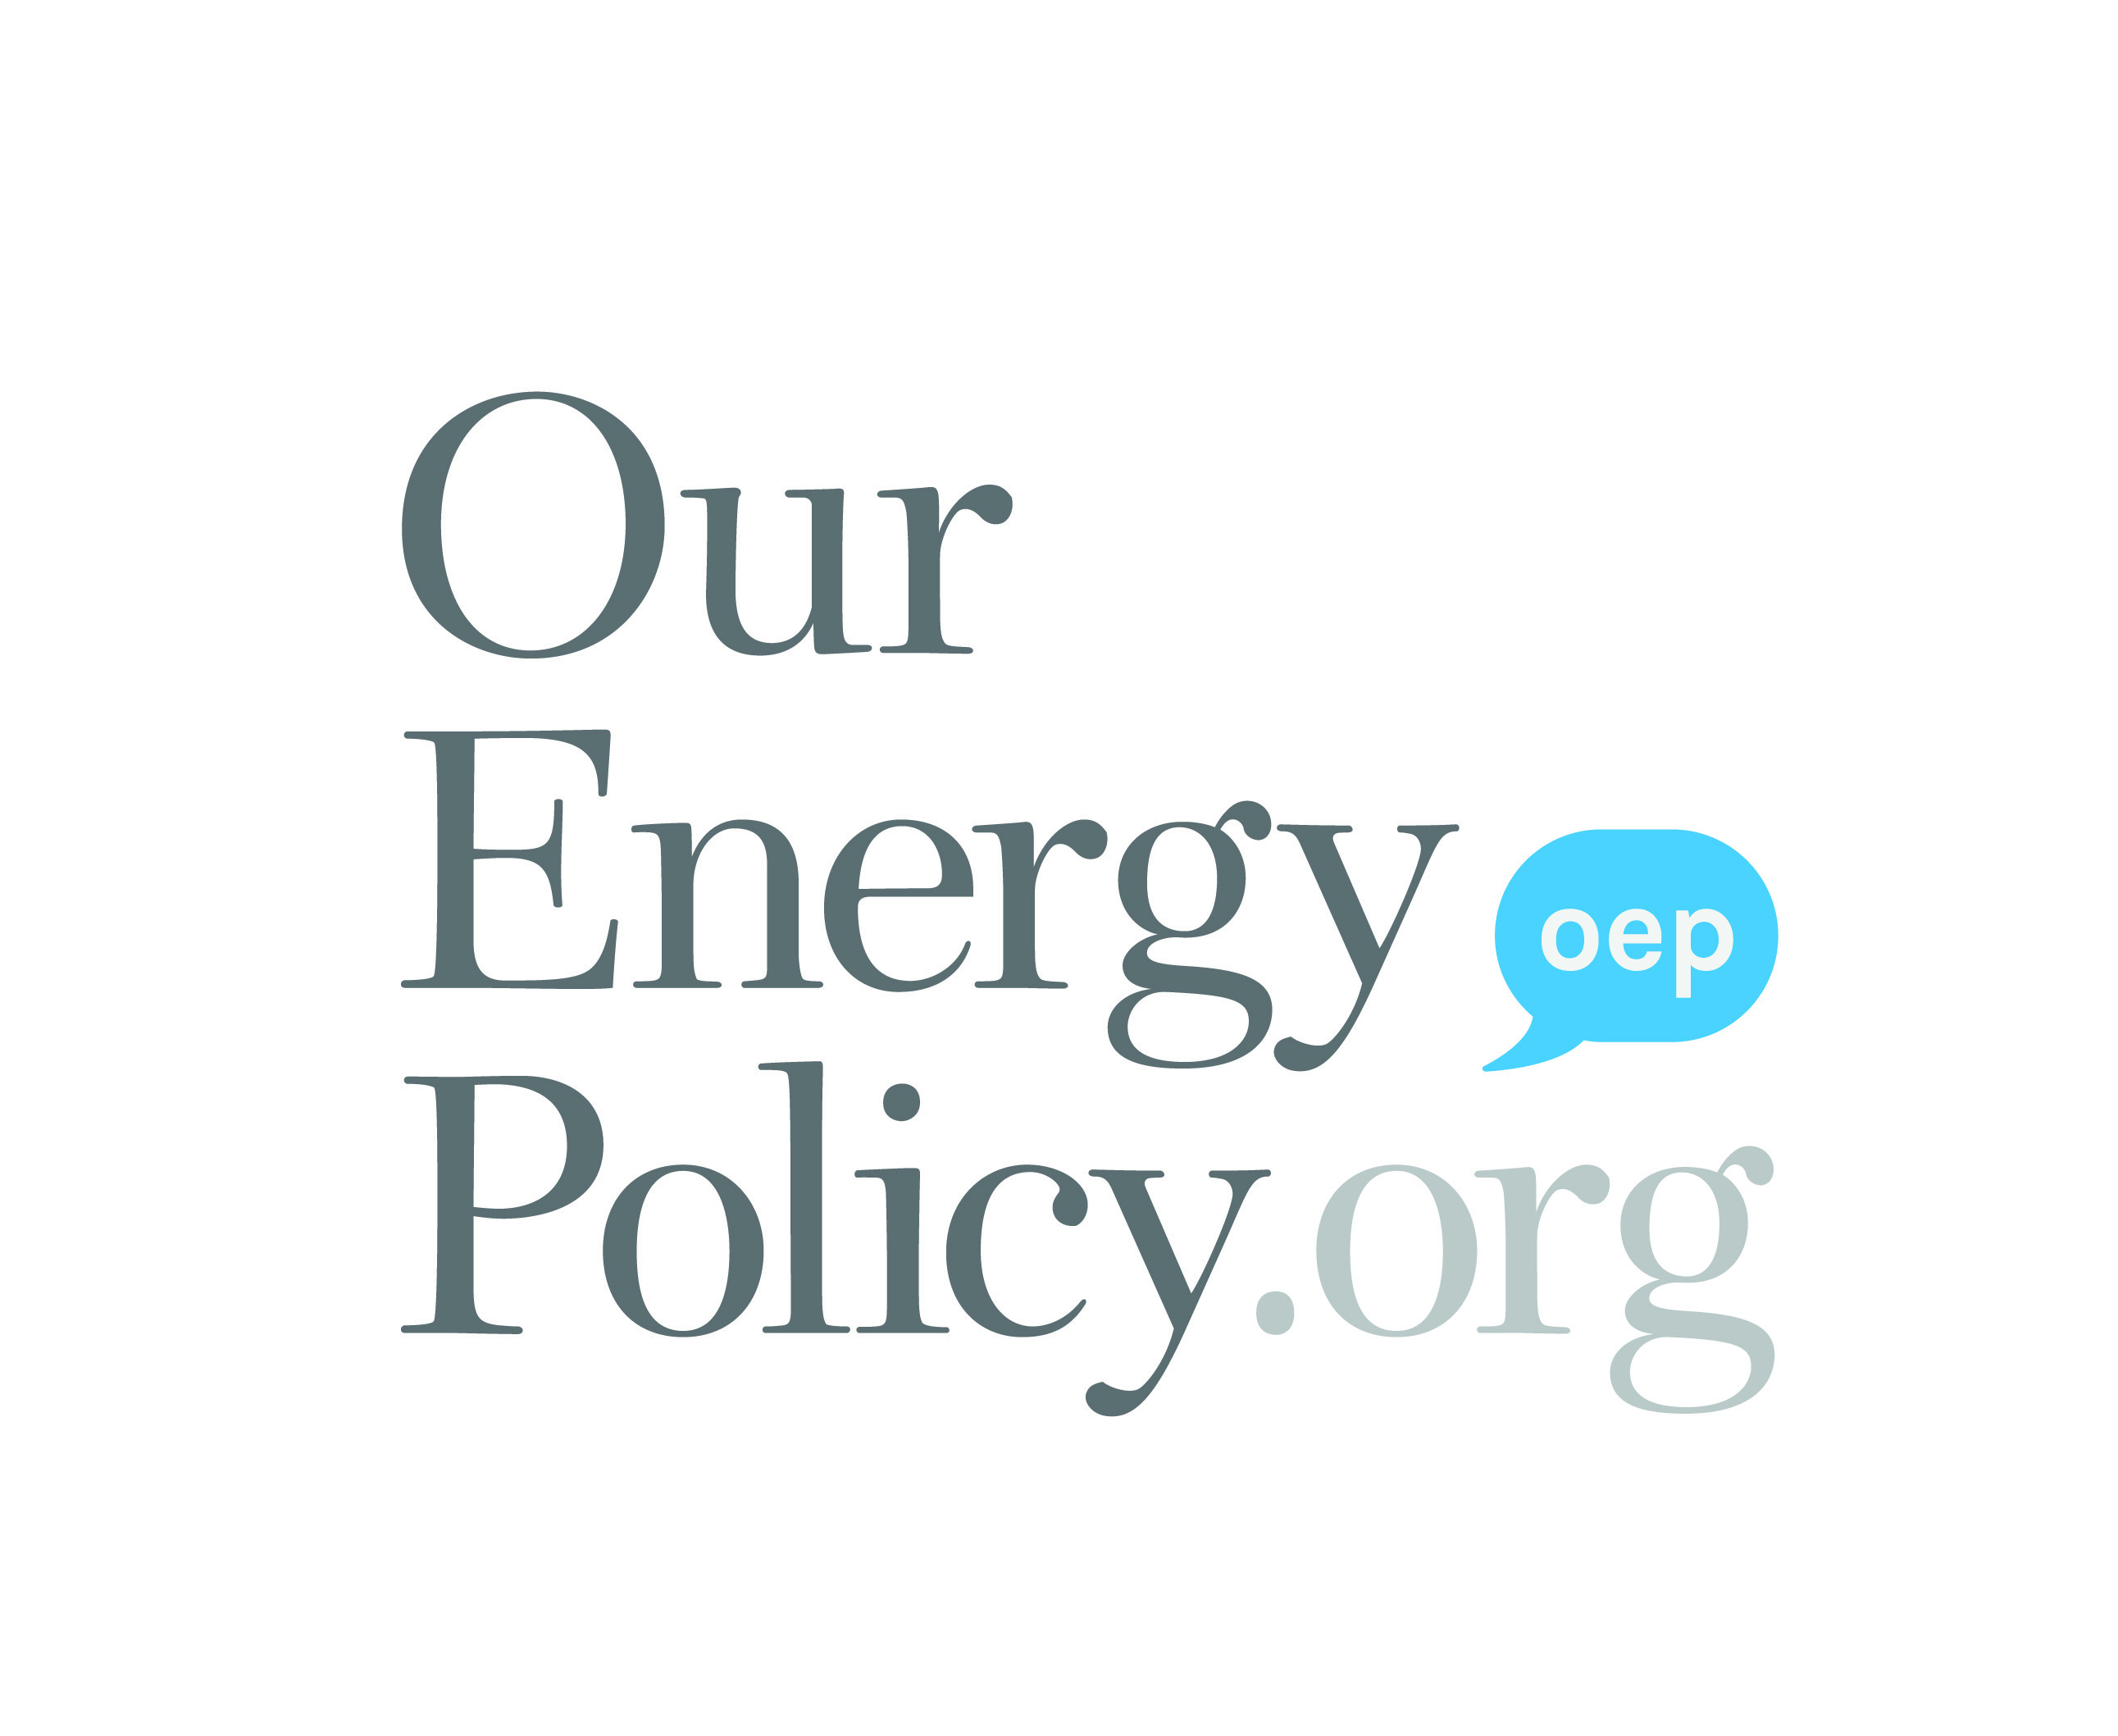 OurEnergyPolicy.org